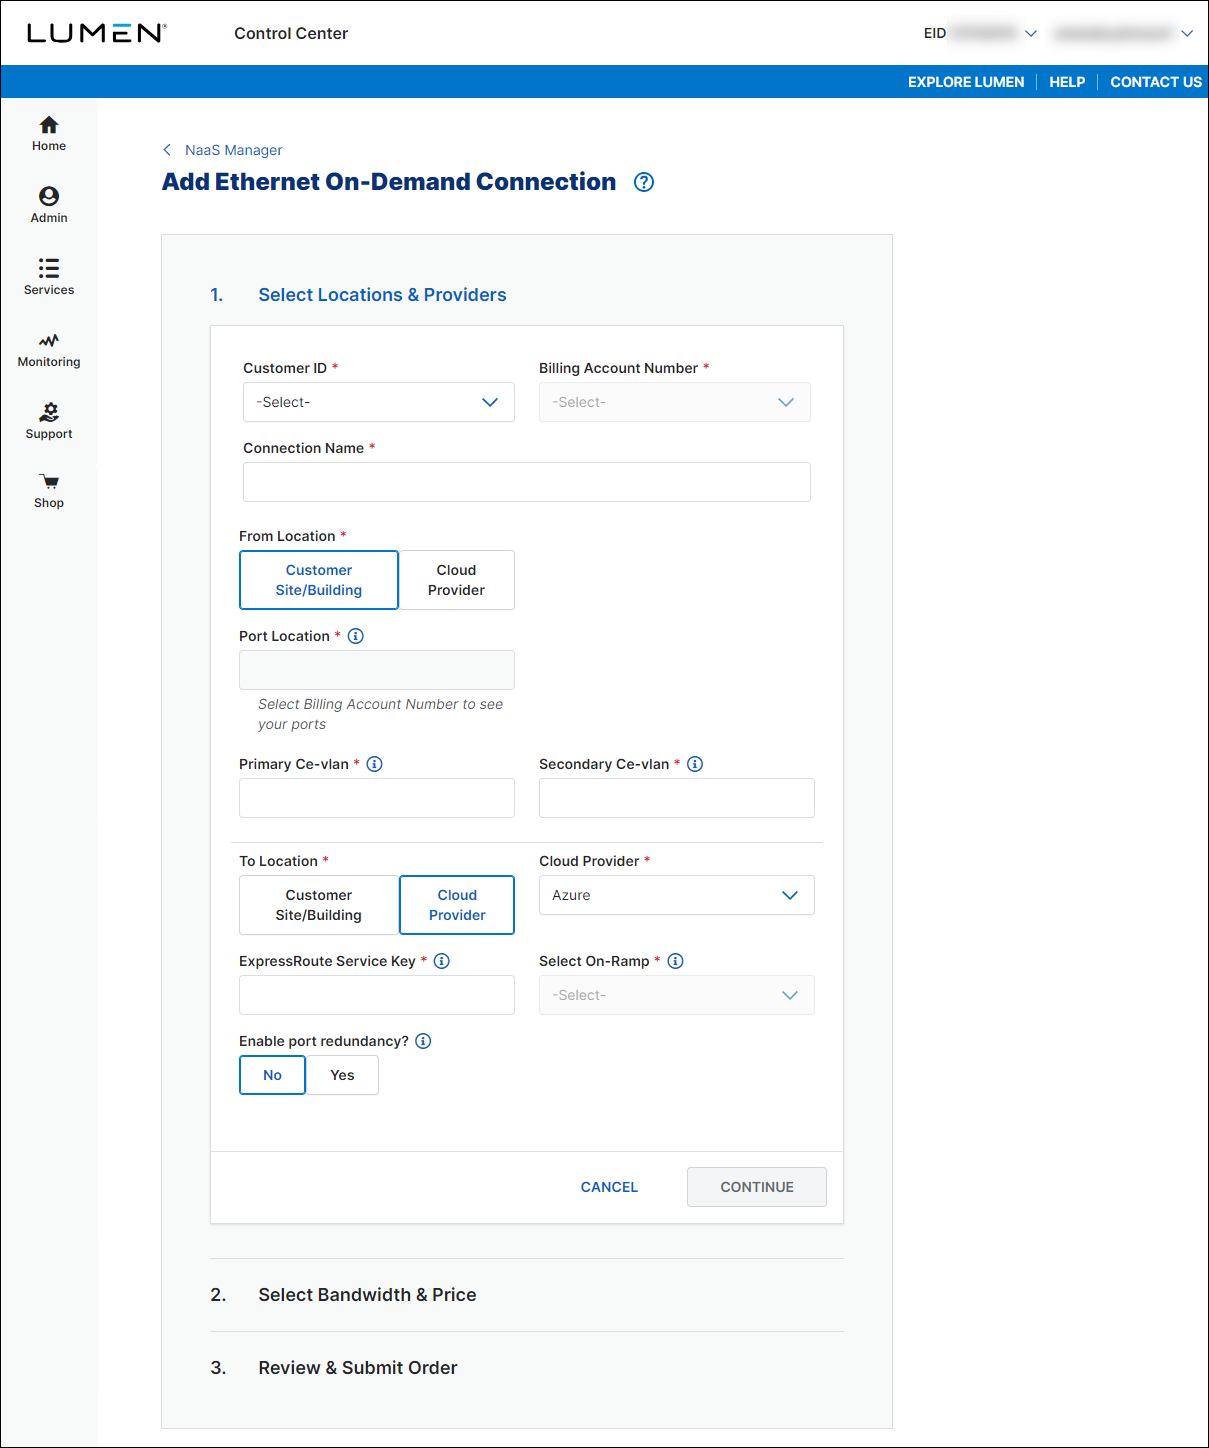 NaaS Ethernet On-Demand connection from your location to Azure